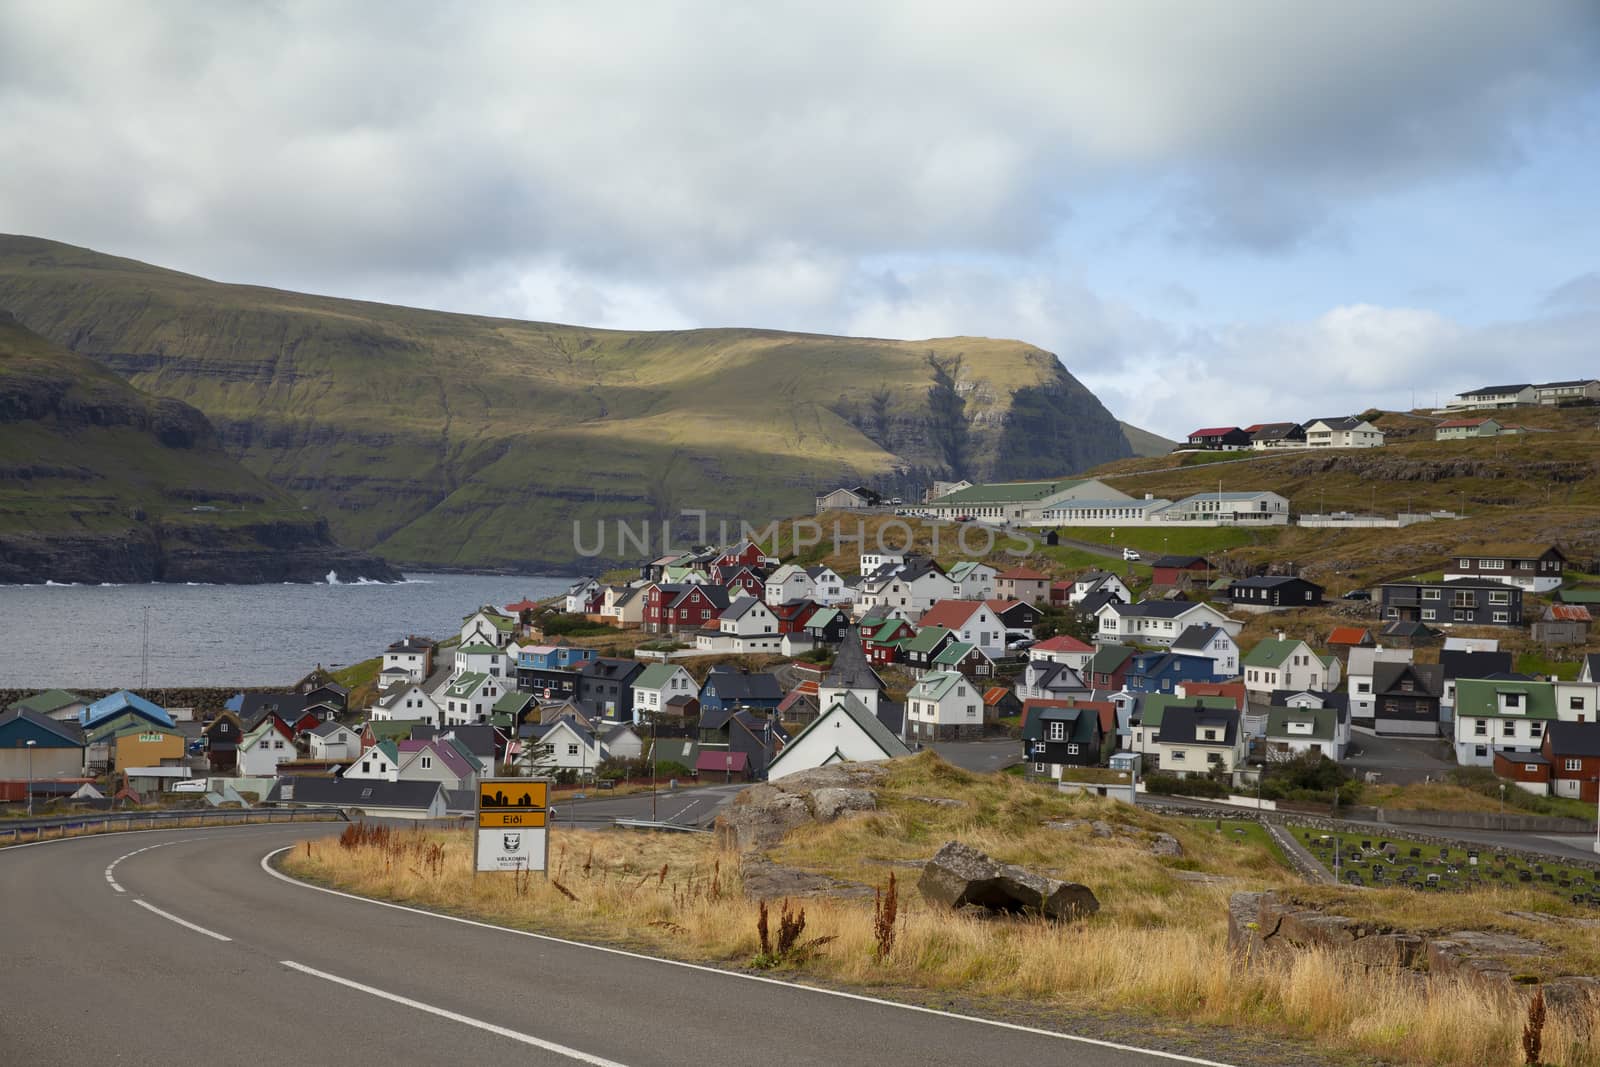 Eidi village, Faroe Island - 19 September: Panoramic view of the village with the sign showing its name